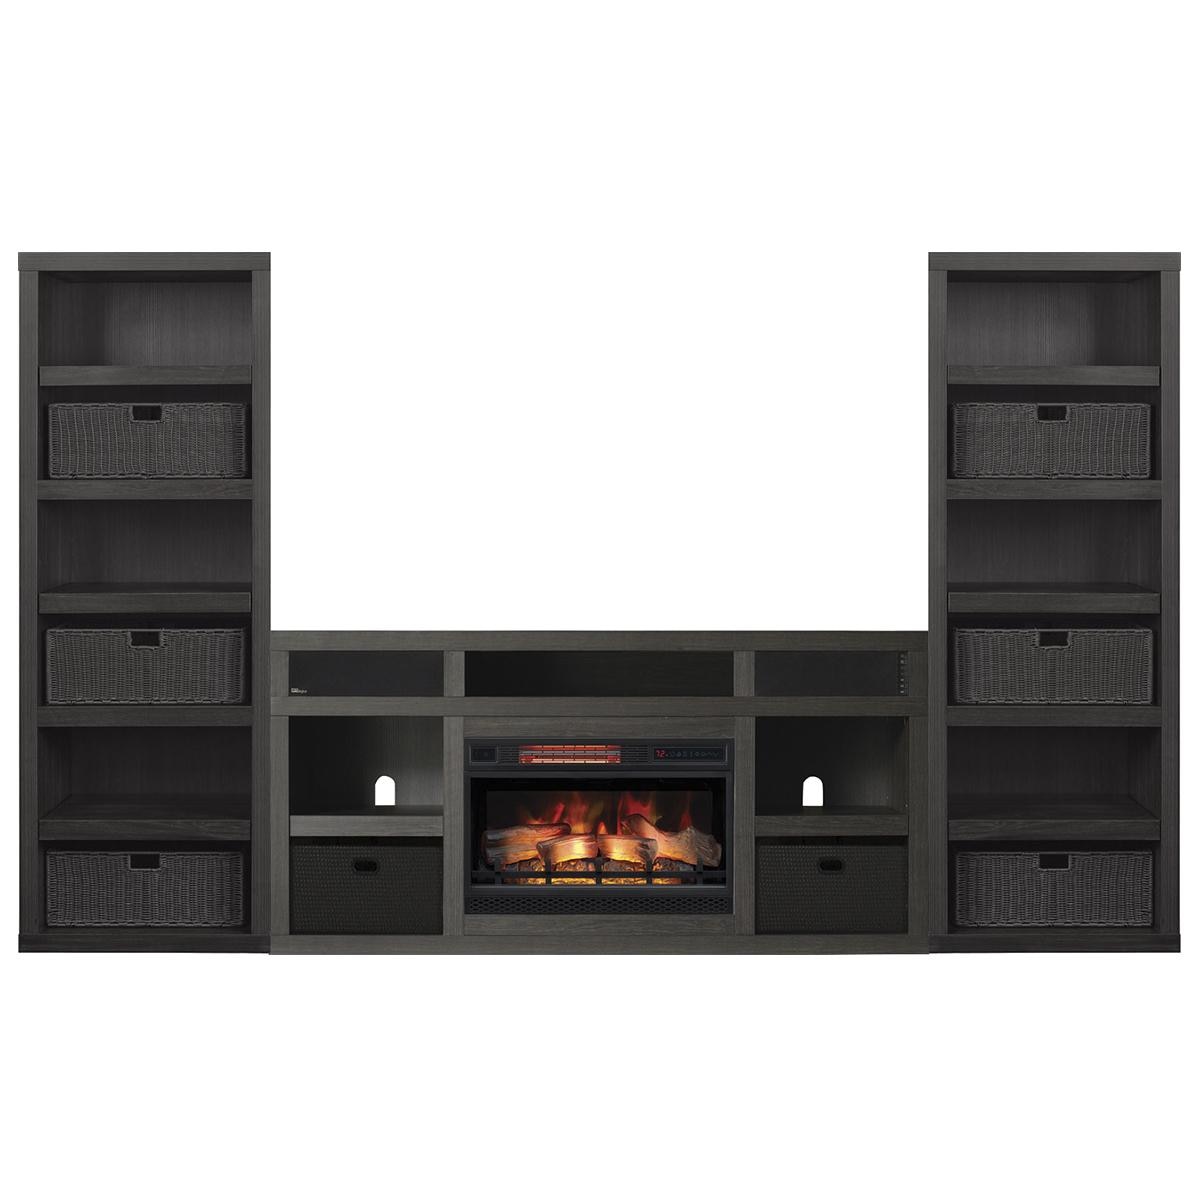 Solid Wood Entertainment Center with Fireplace Lovely Fabio Flames Greatlin 3 Piece Fireplace Entertainment Wall